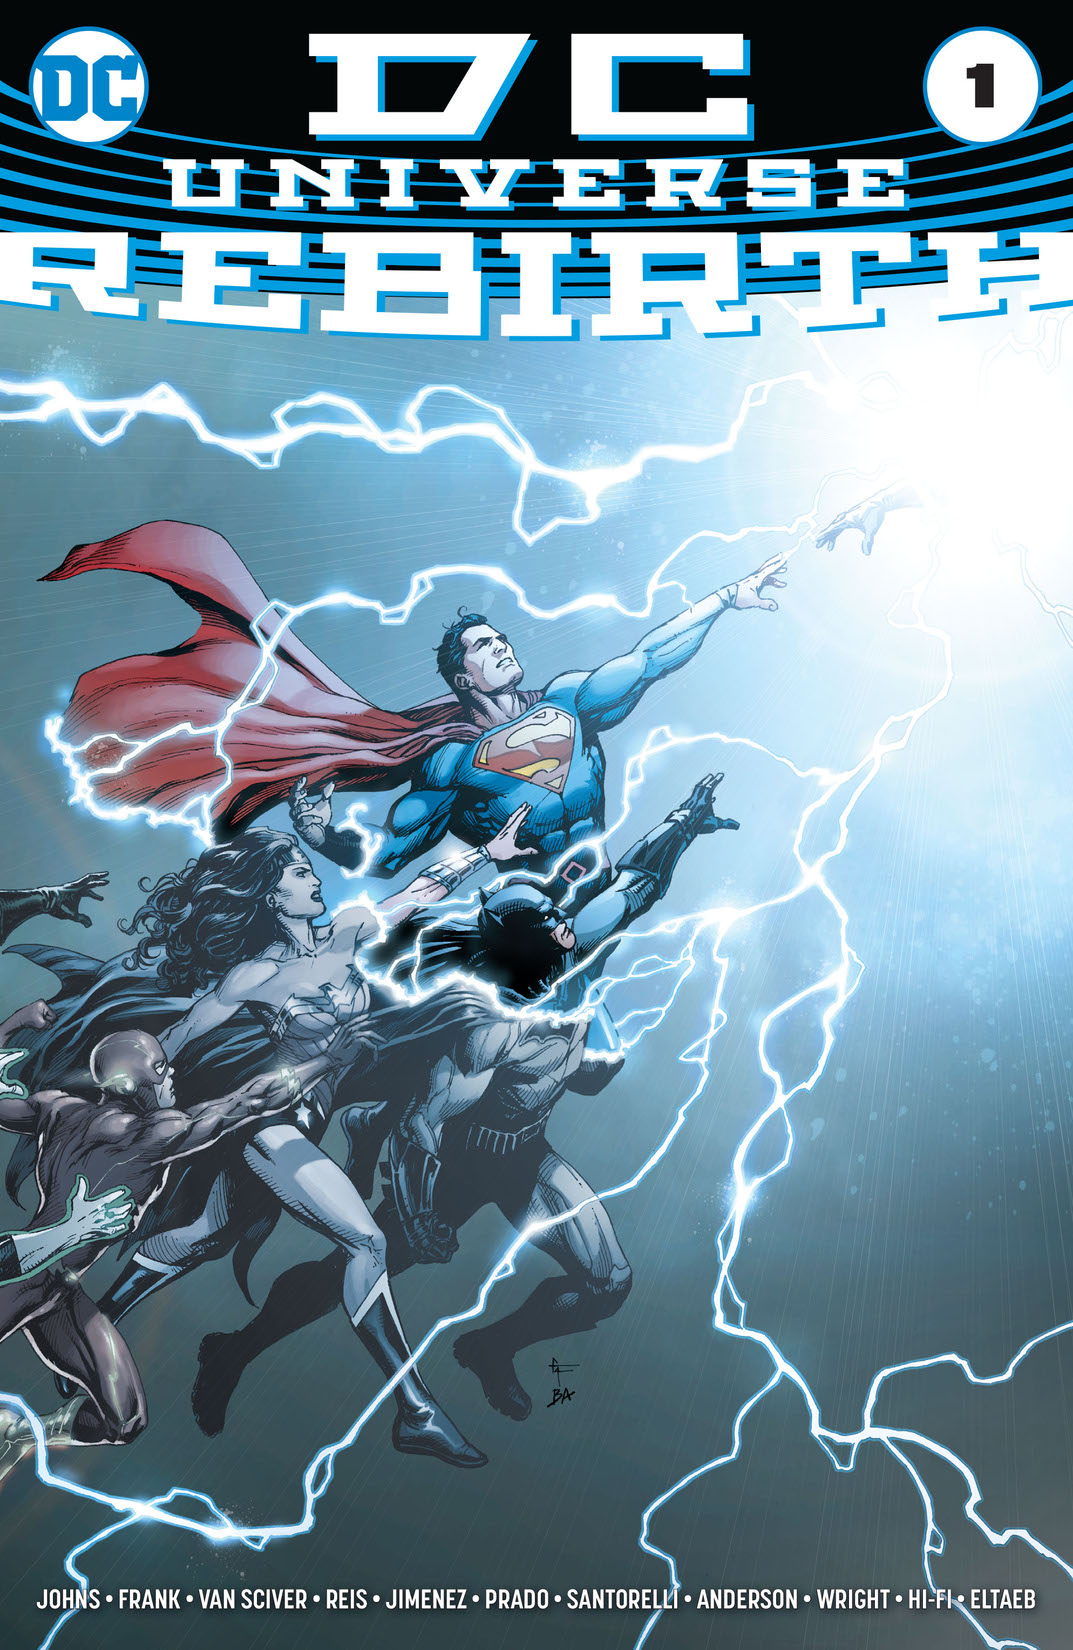 DC Universe: Rebirth #1 preview images